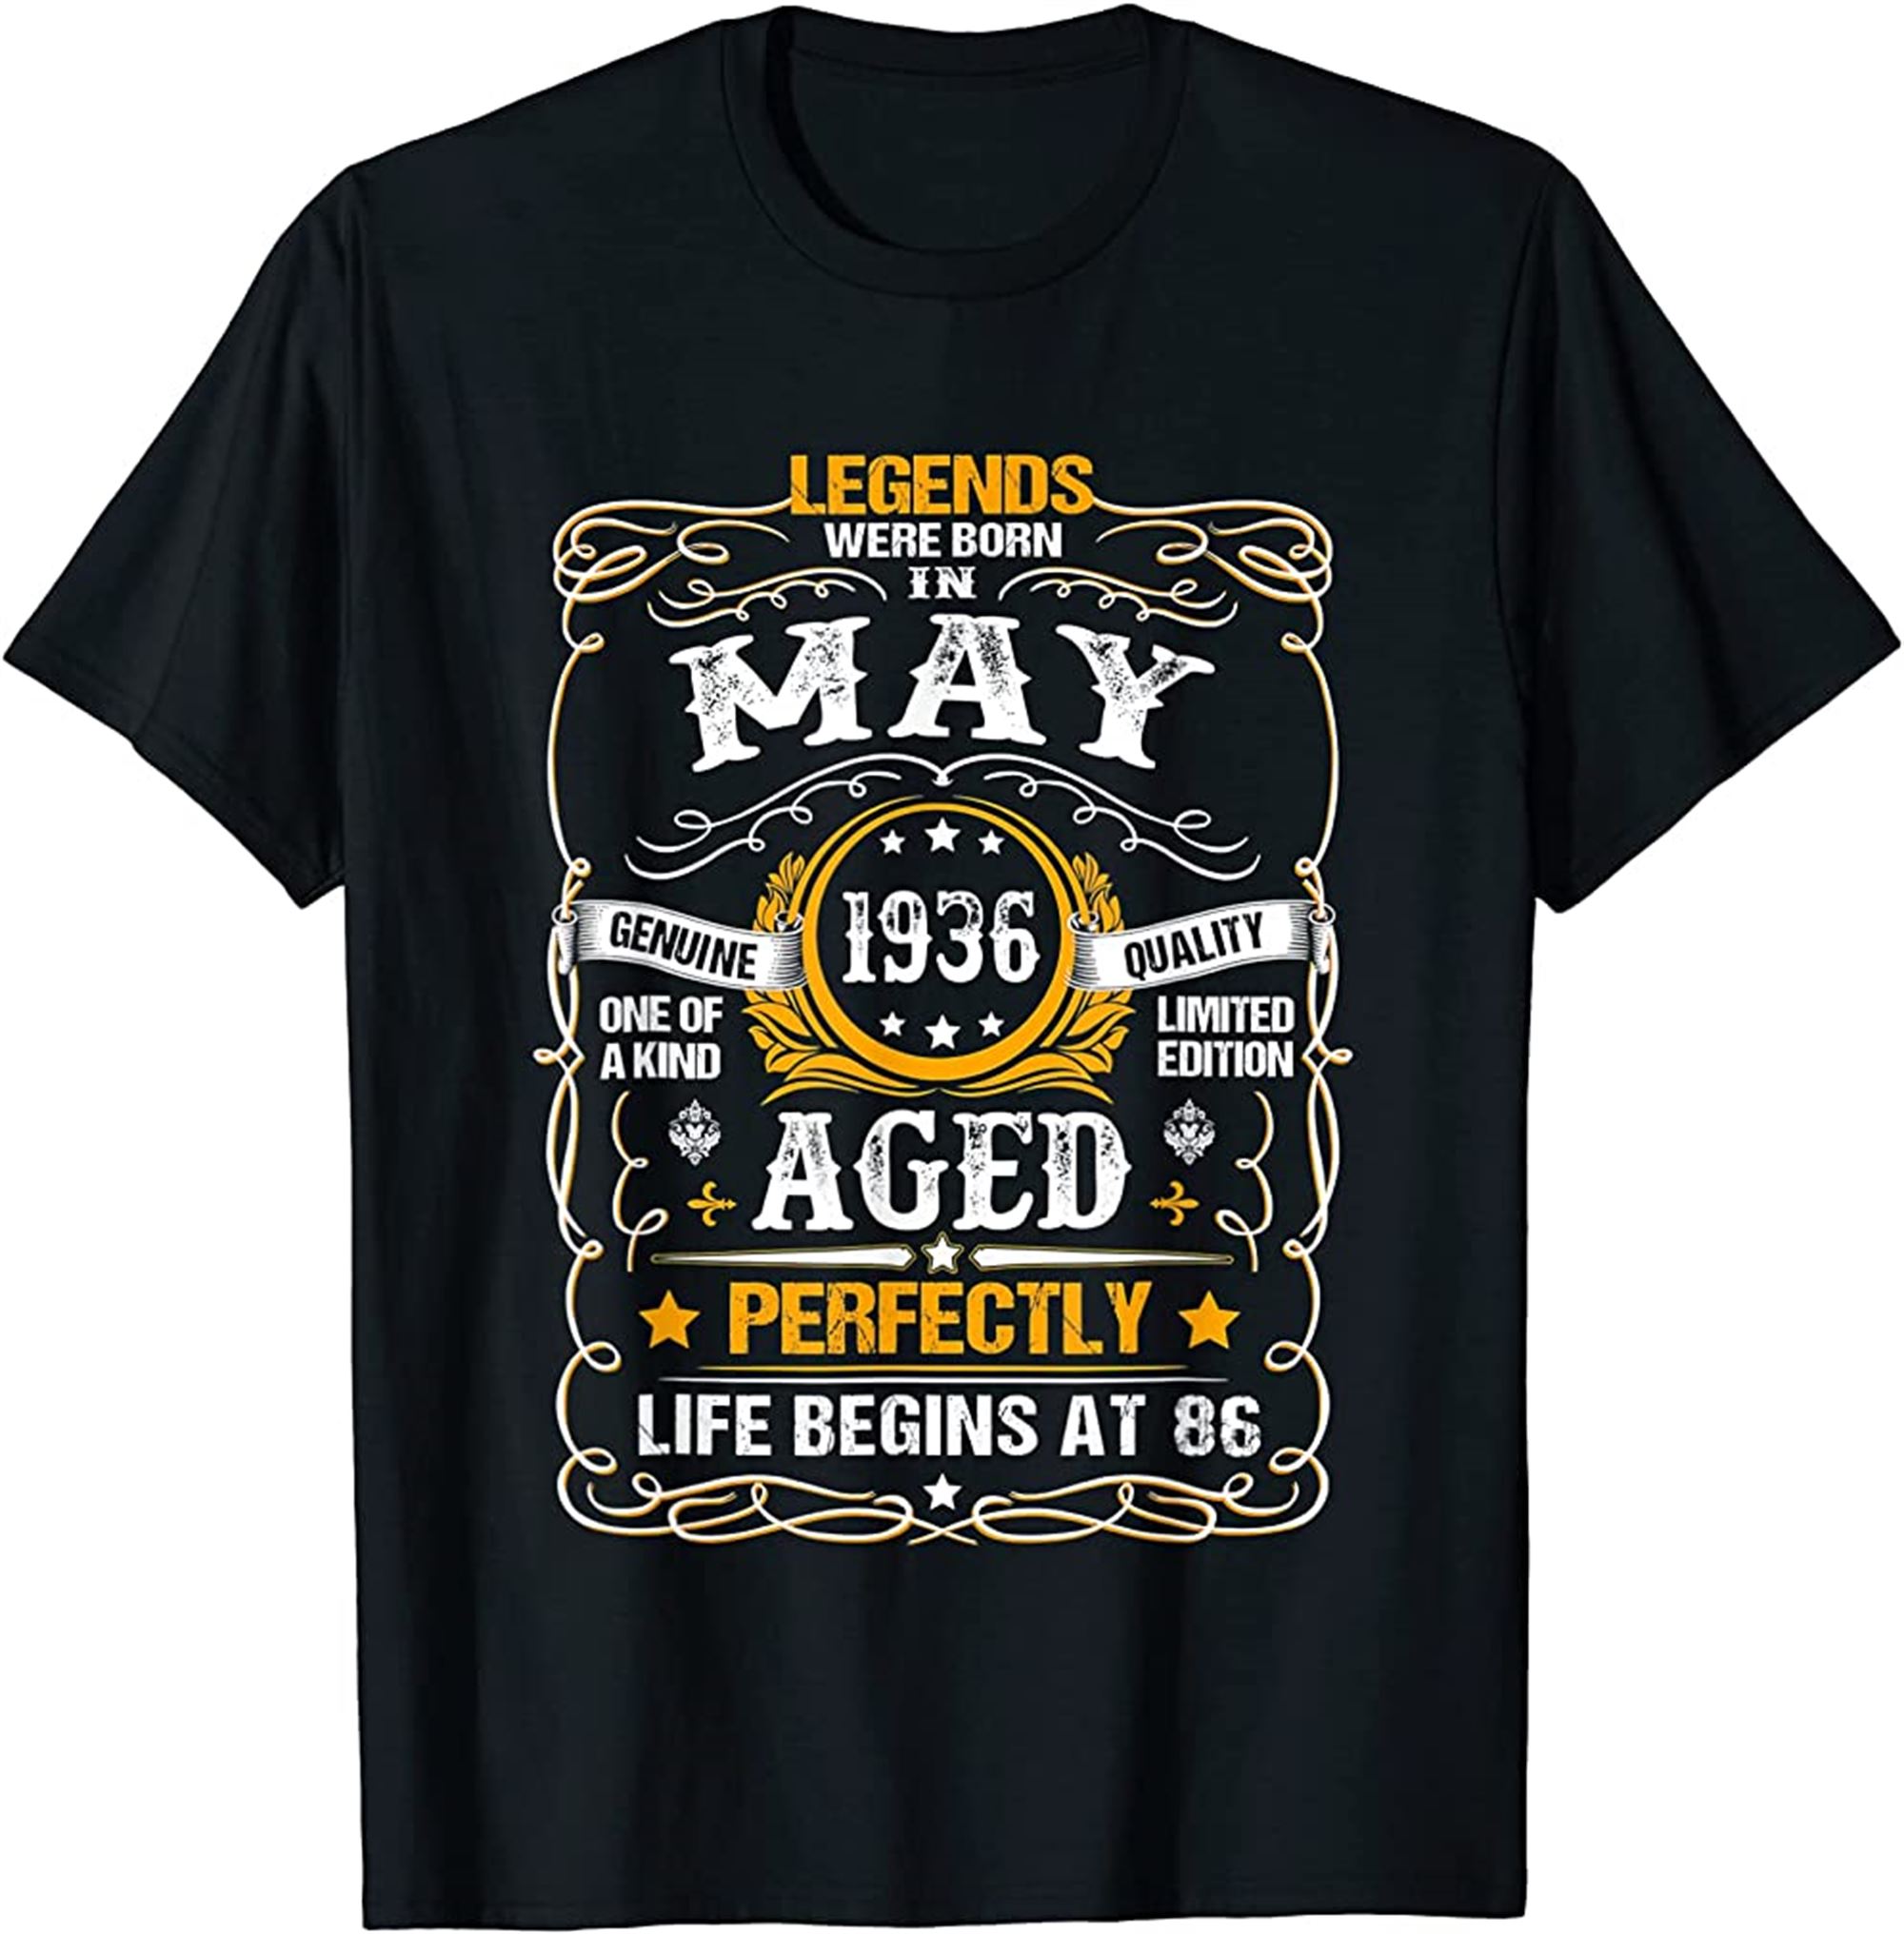 86th Birthday Gift For Legends Born May 1936 86 Yrs Old T-shirt Full Size Up To 5xl